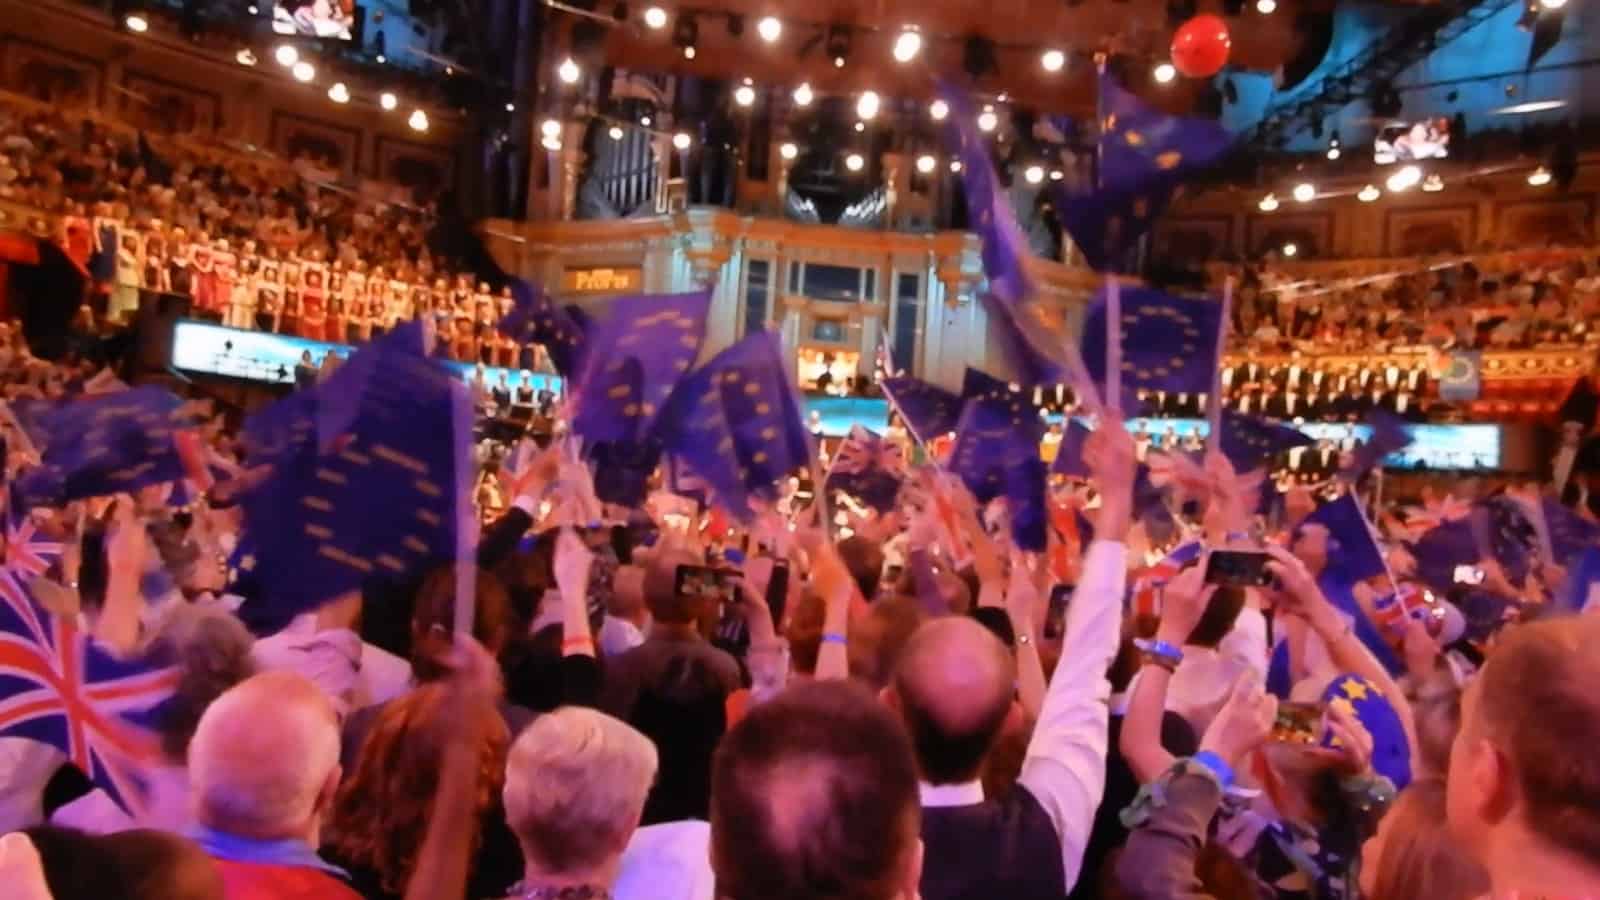 75,000 EU flags to be handed out to Eurovision crowd for final